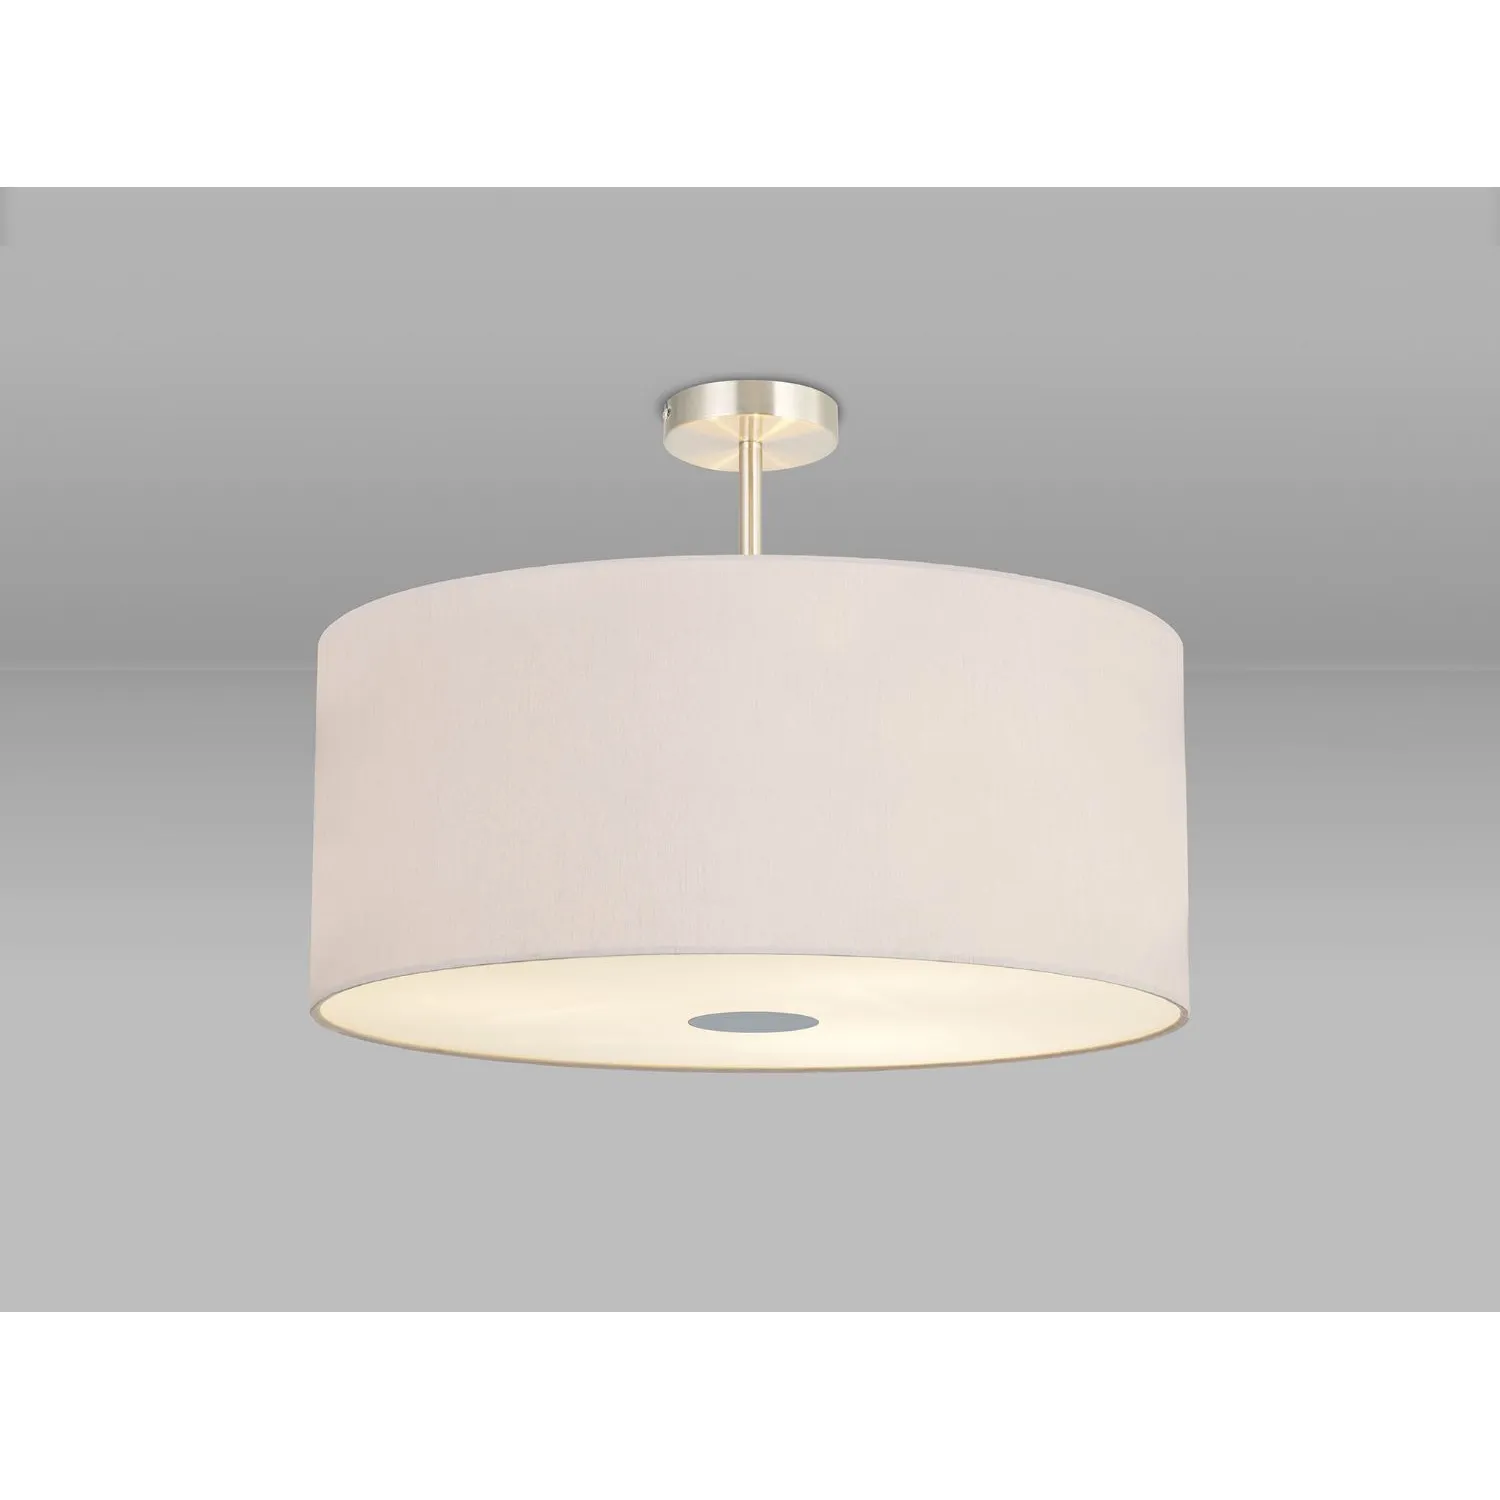 Baymont Satin Nickel 5 Light E27 Semi Flush Fixture c w 600 Dual Faux Silk Fabric Shade, Nude Beige Moonlight And 600mm Frosted PC Acrylic Diffuser